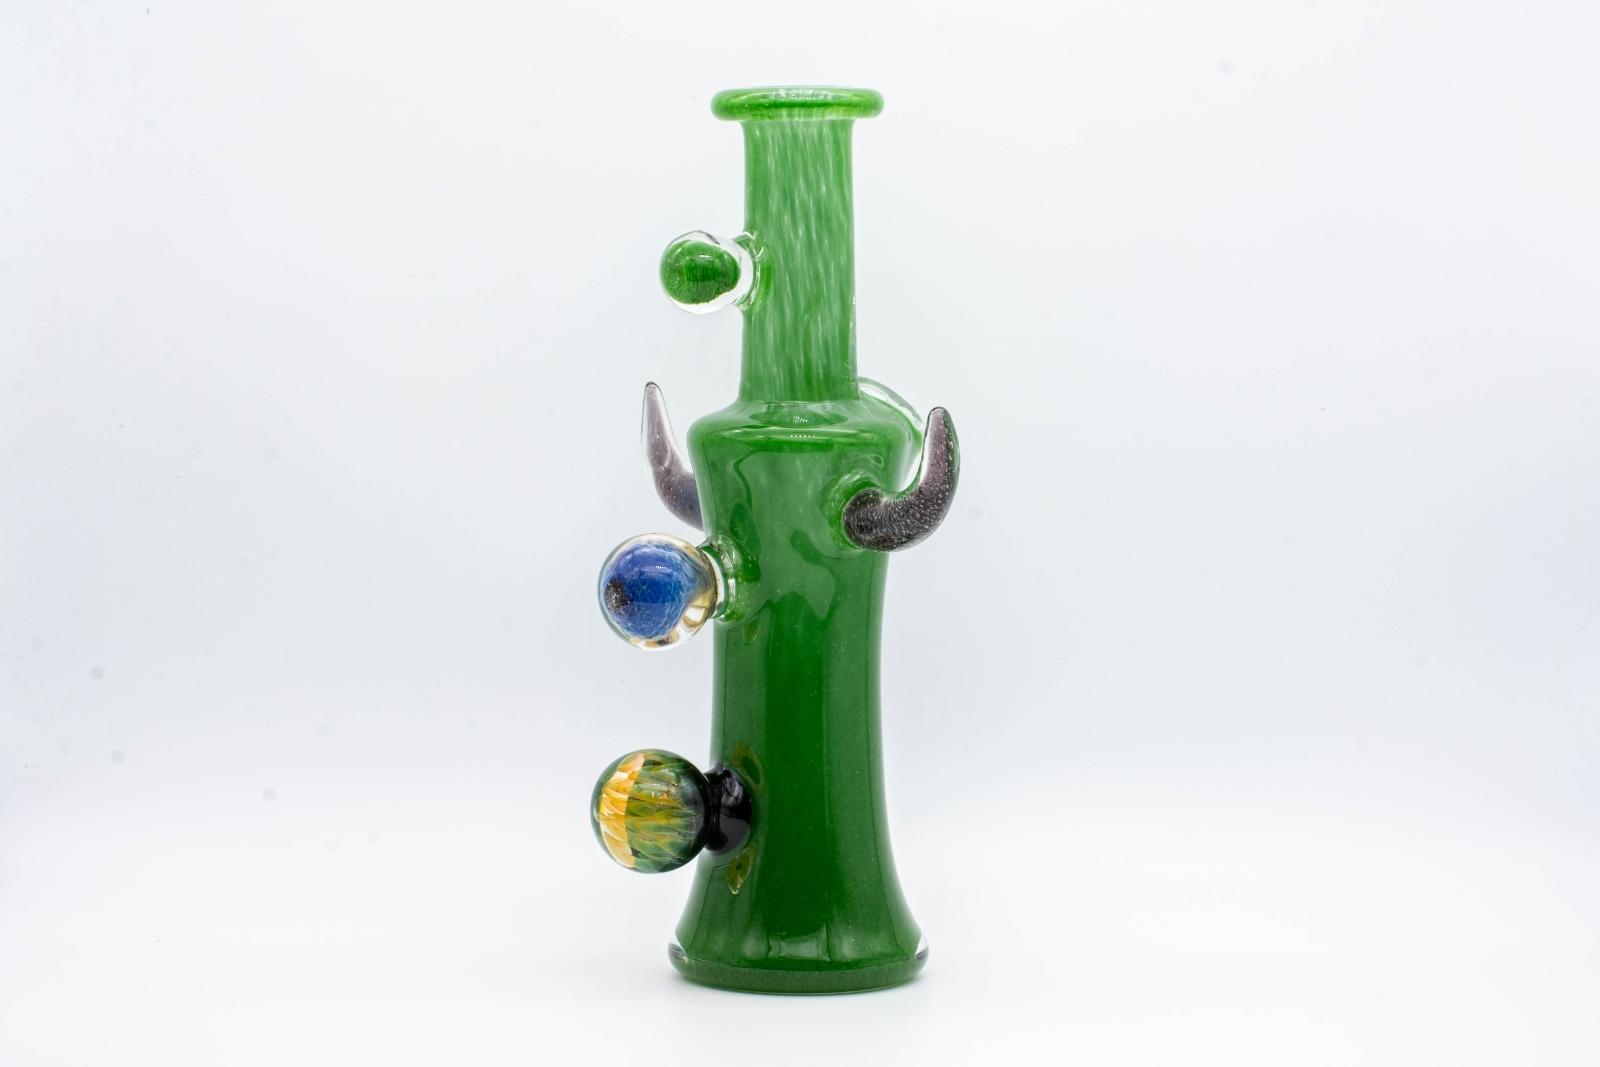 A green, 8-inch jammer, made by GooMan Glass, on a white background